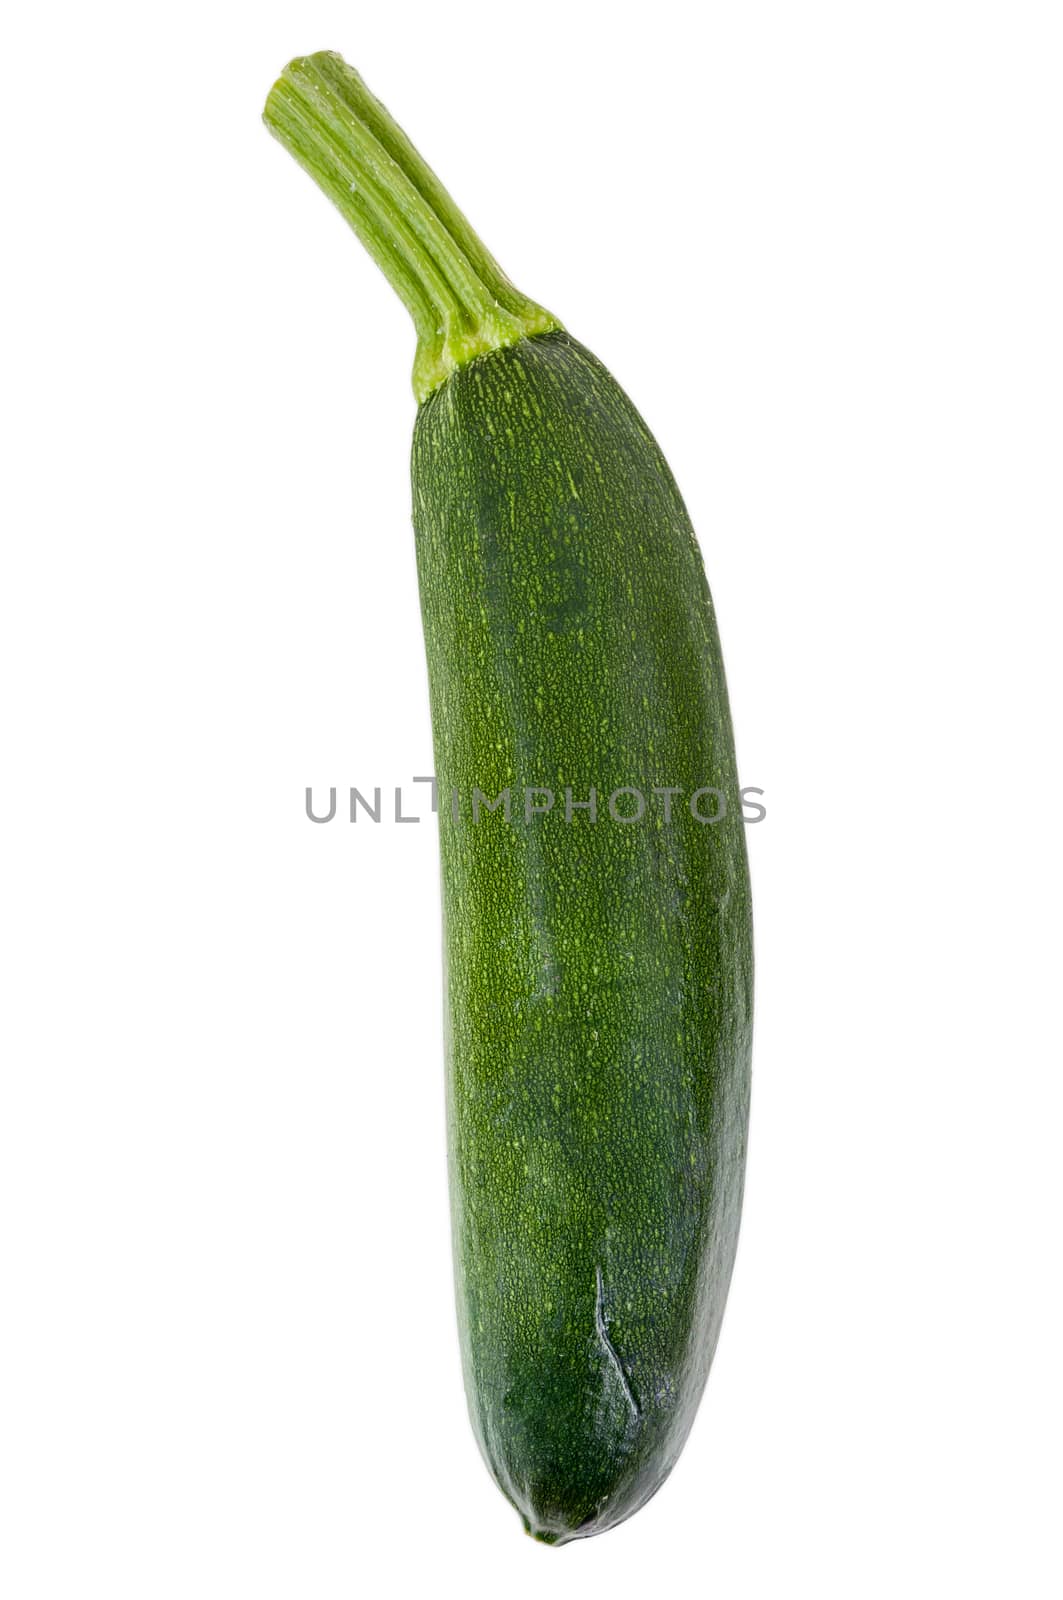 Single zucchini isolated on white background with clipping path